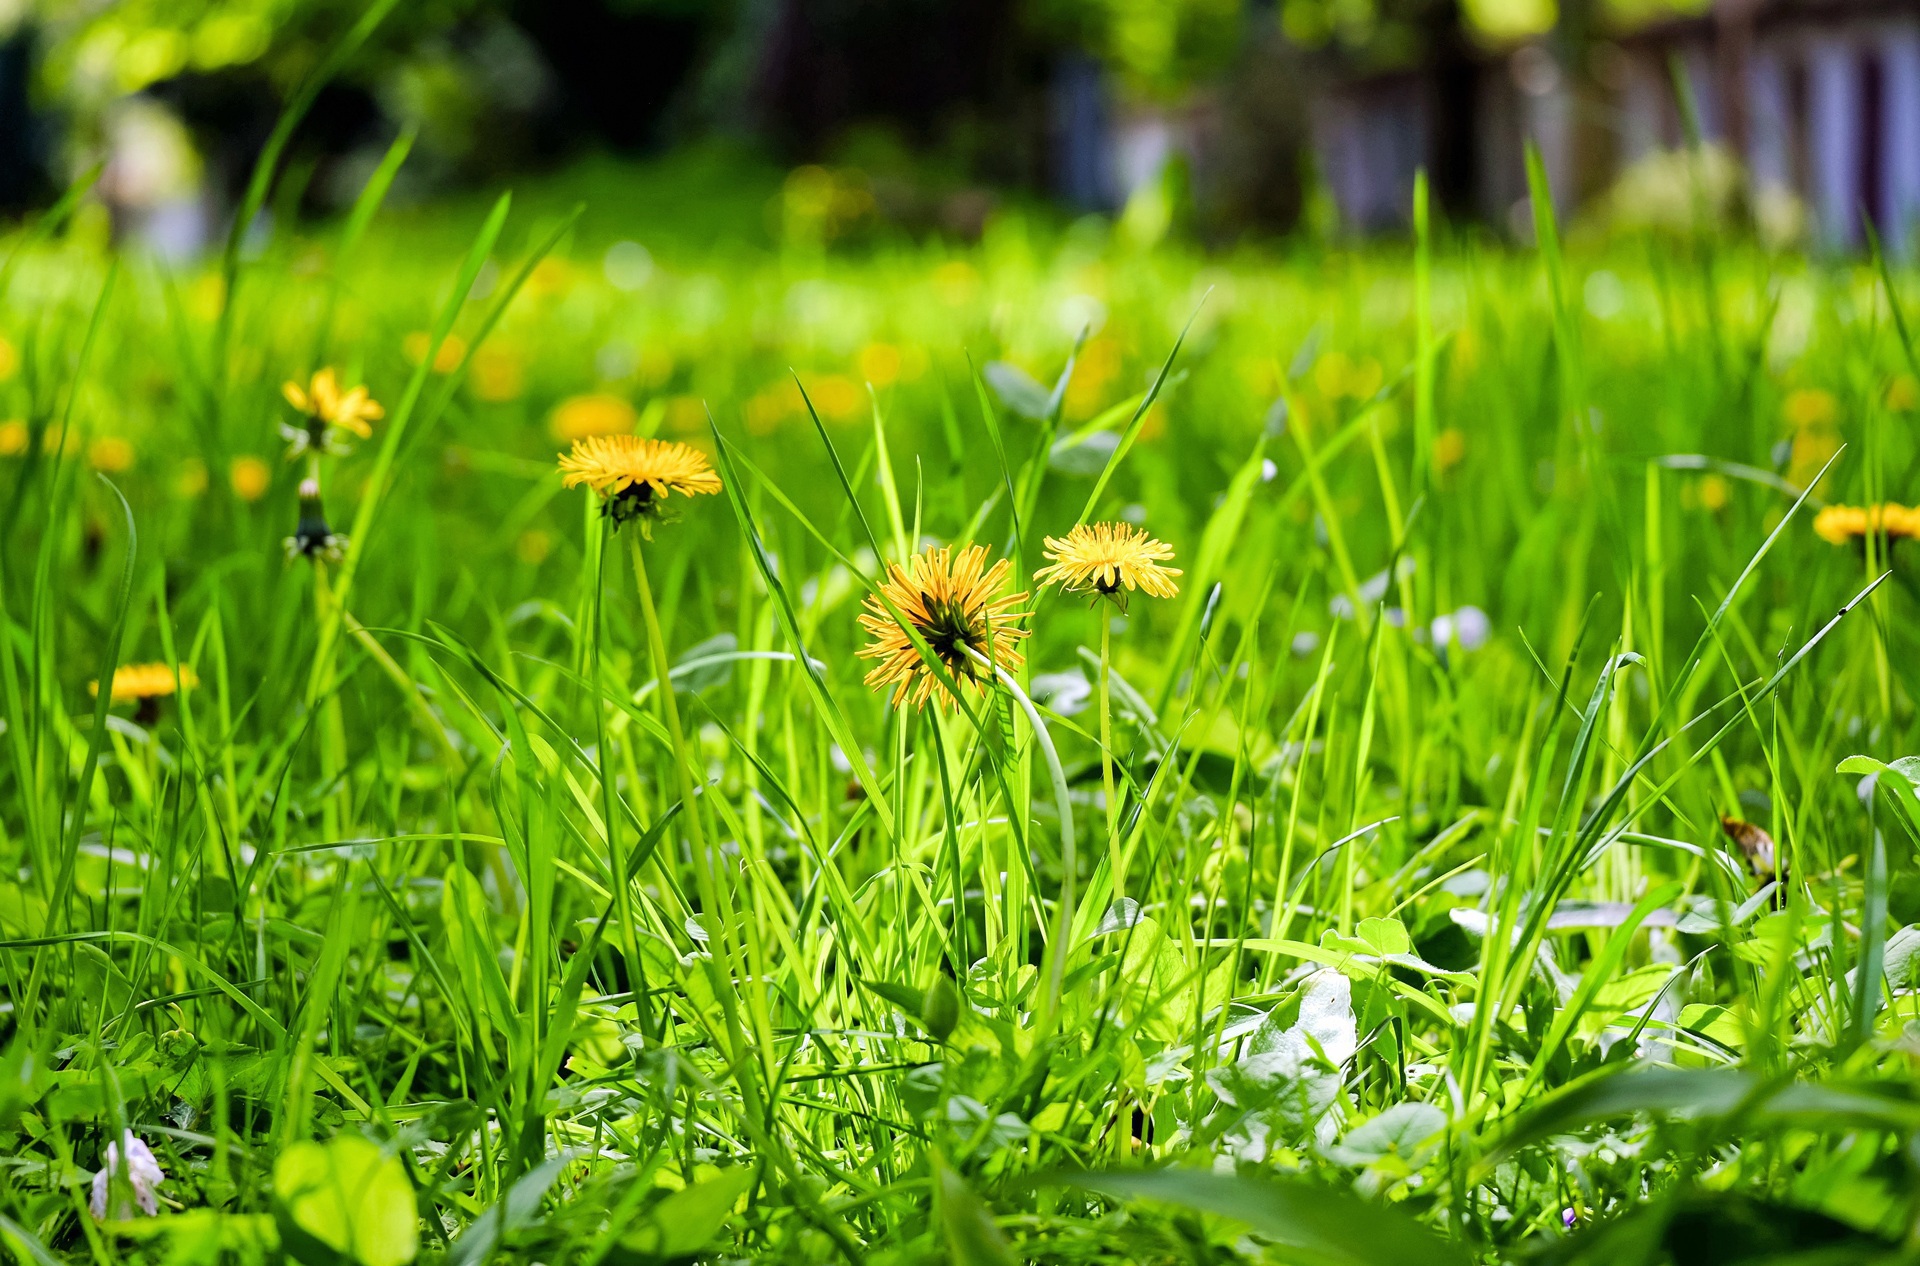 While No Mow May results in blooming dandelions, recent research has shown that dandelions are fairly poor nutrition sources for many pollinator species. (Pixabay photo)